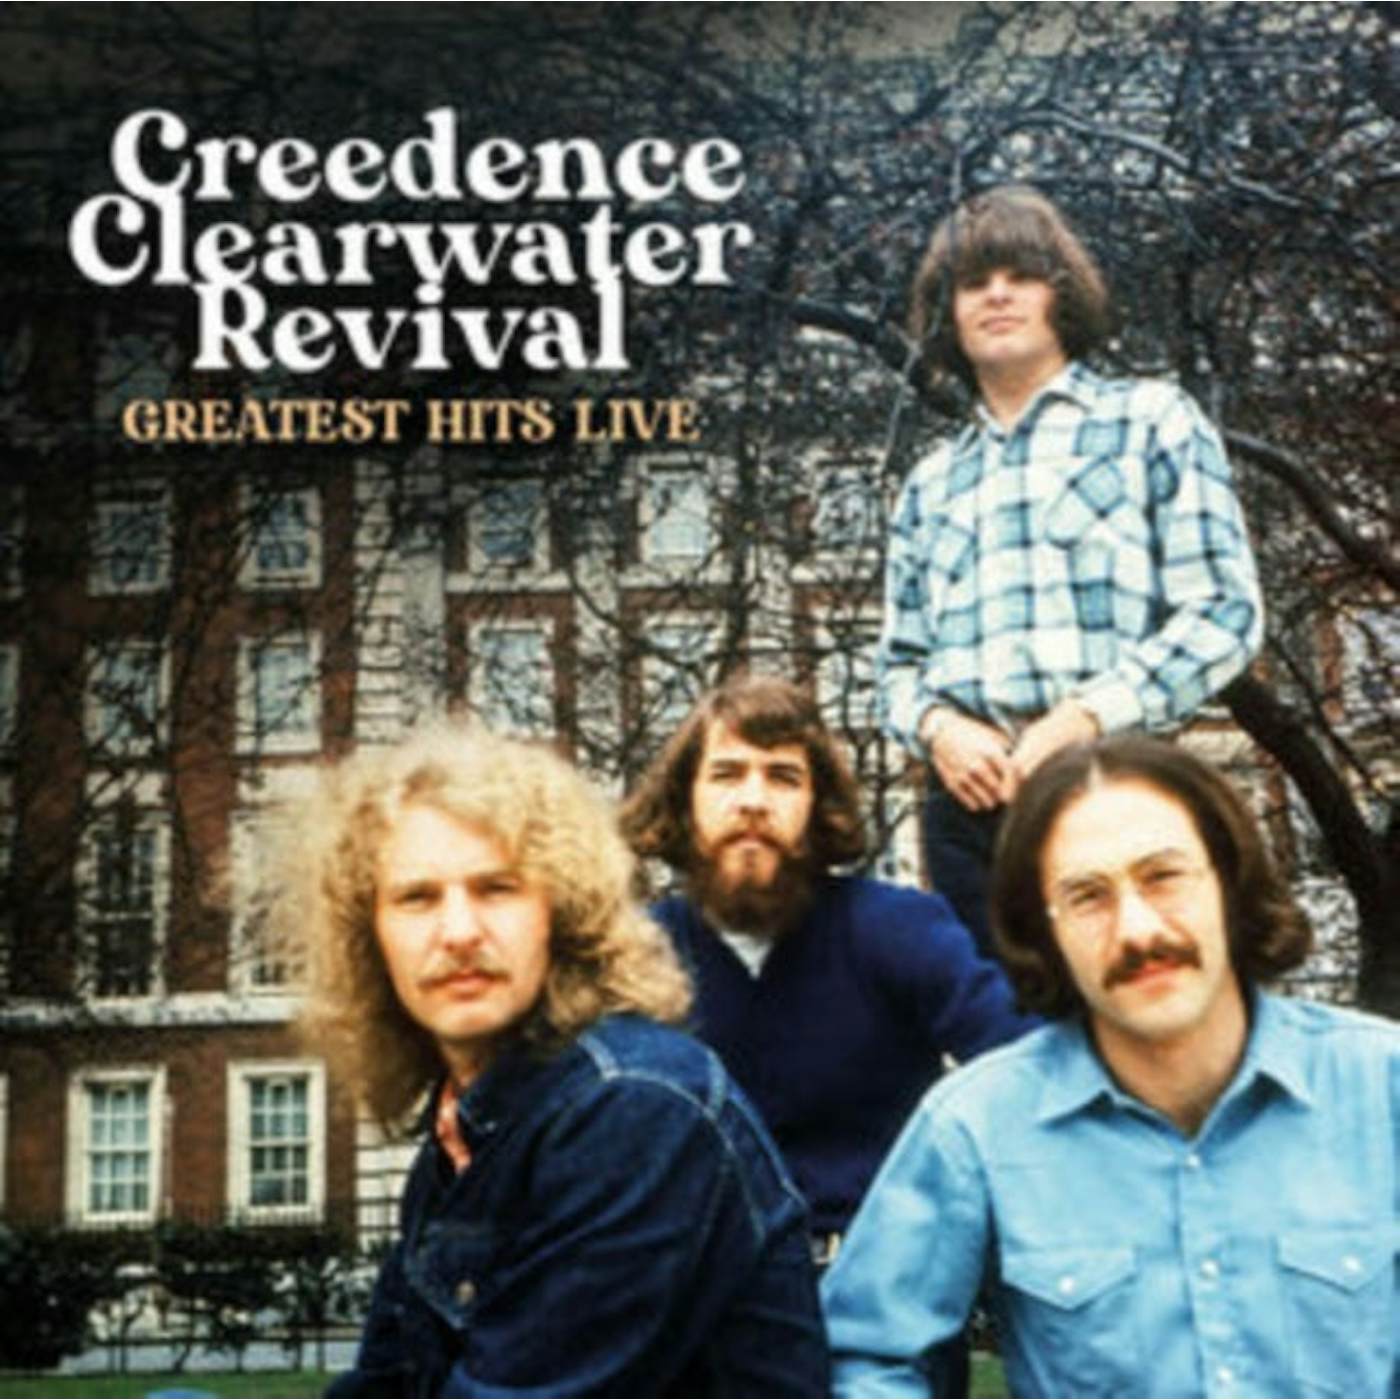 Creedence Clearwater Revival LP - Greatest Hits Live (Vinyl)